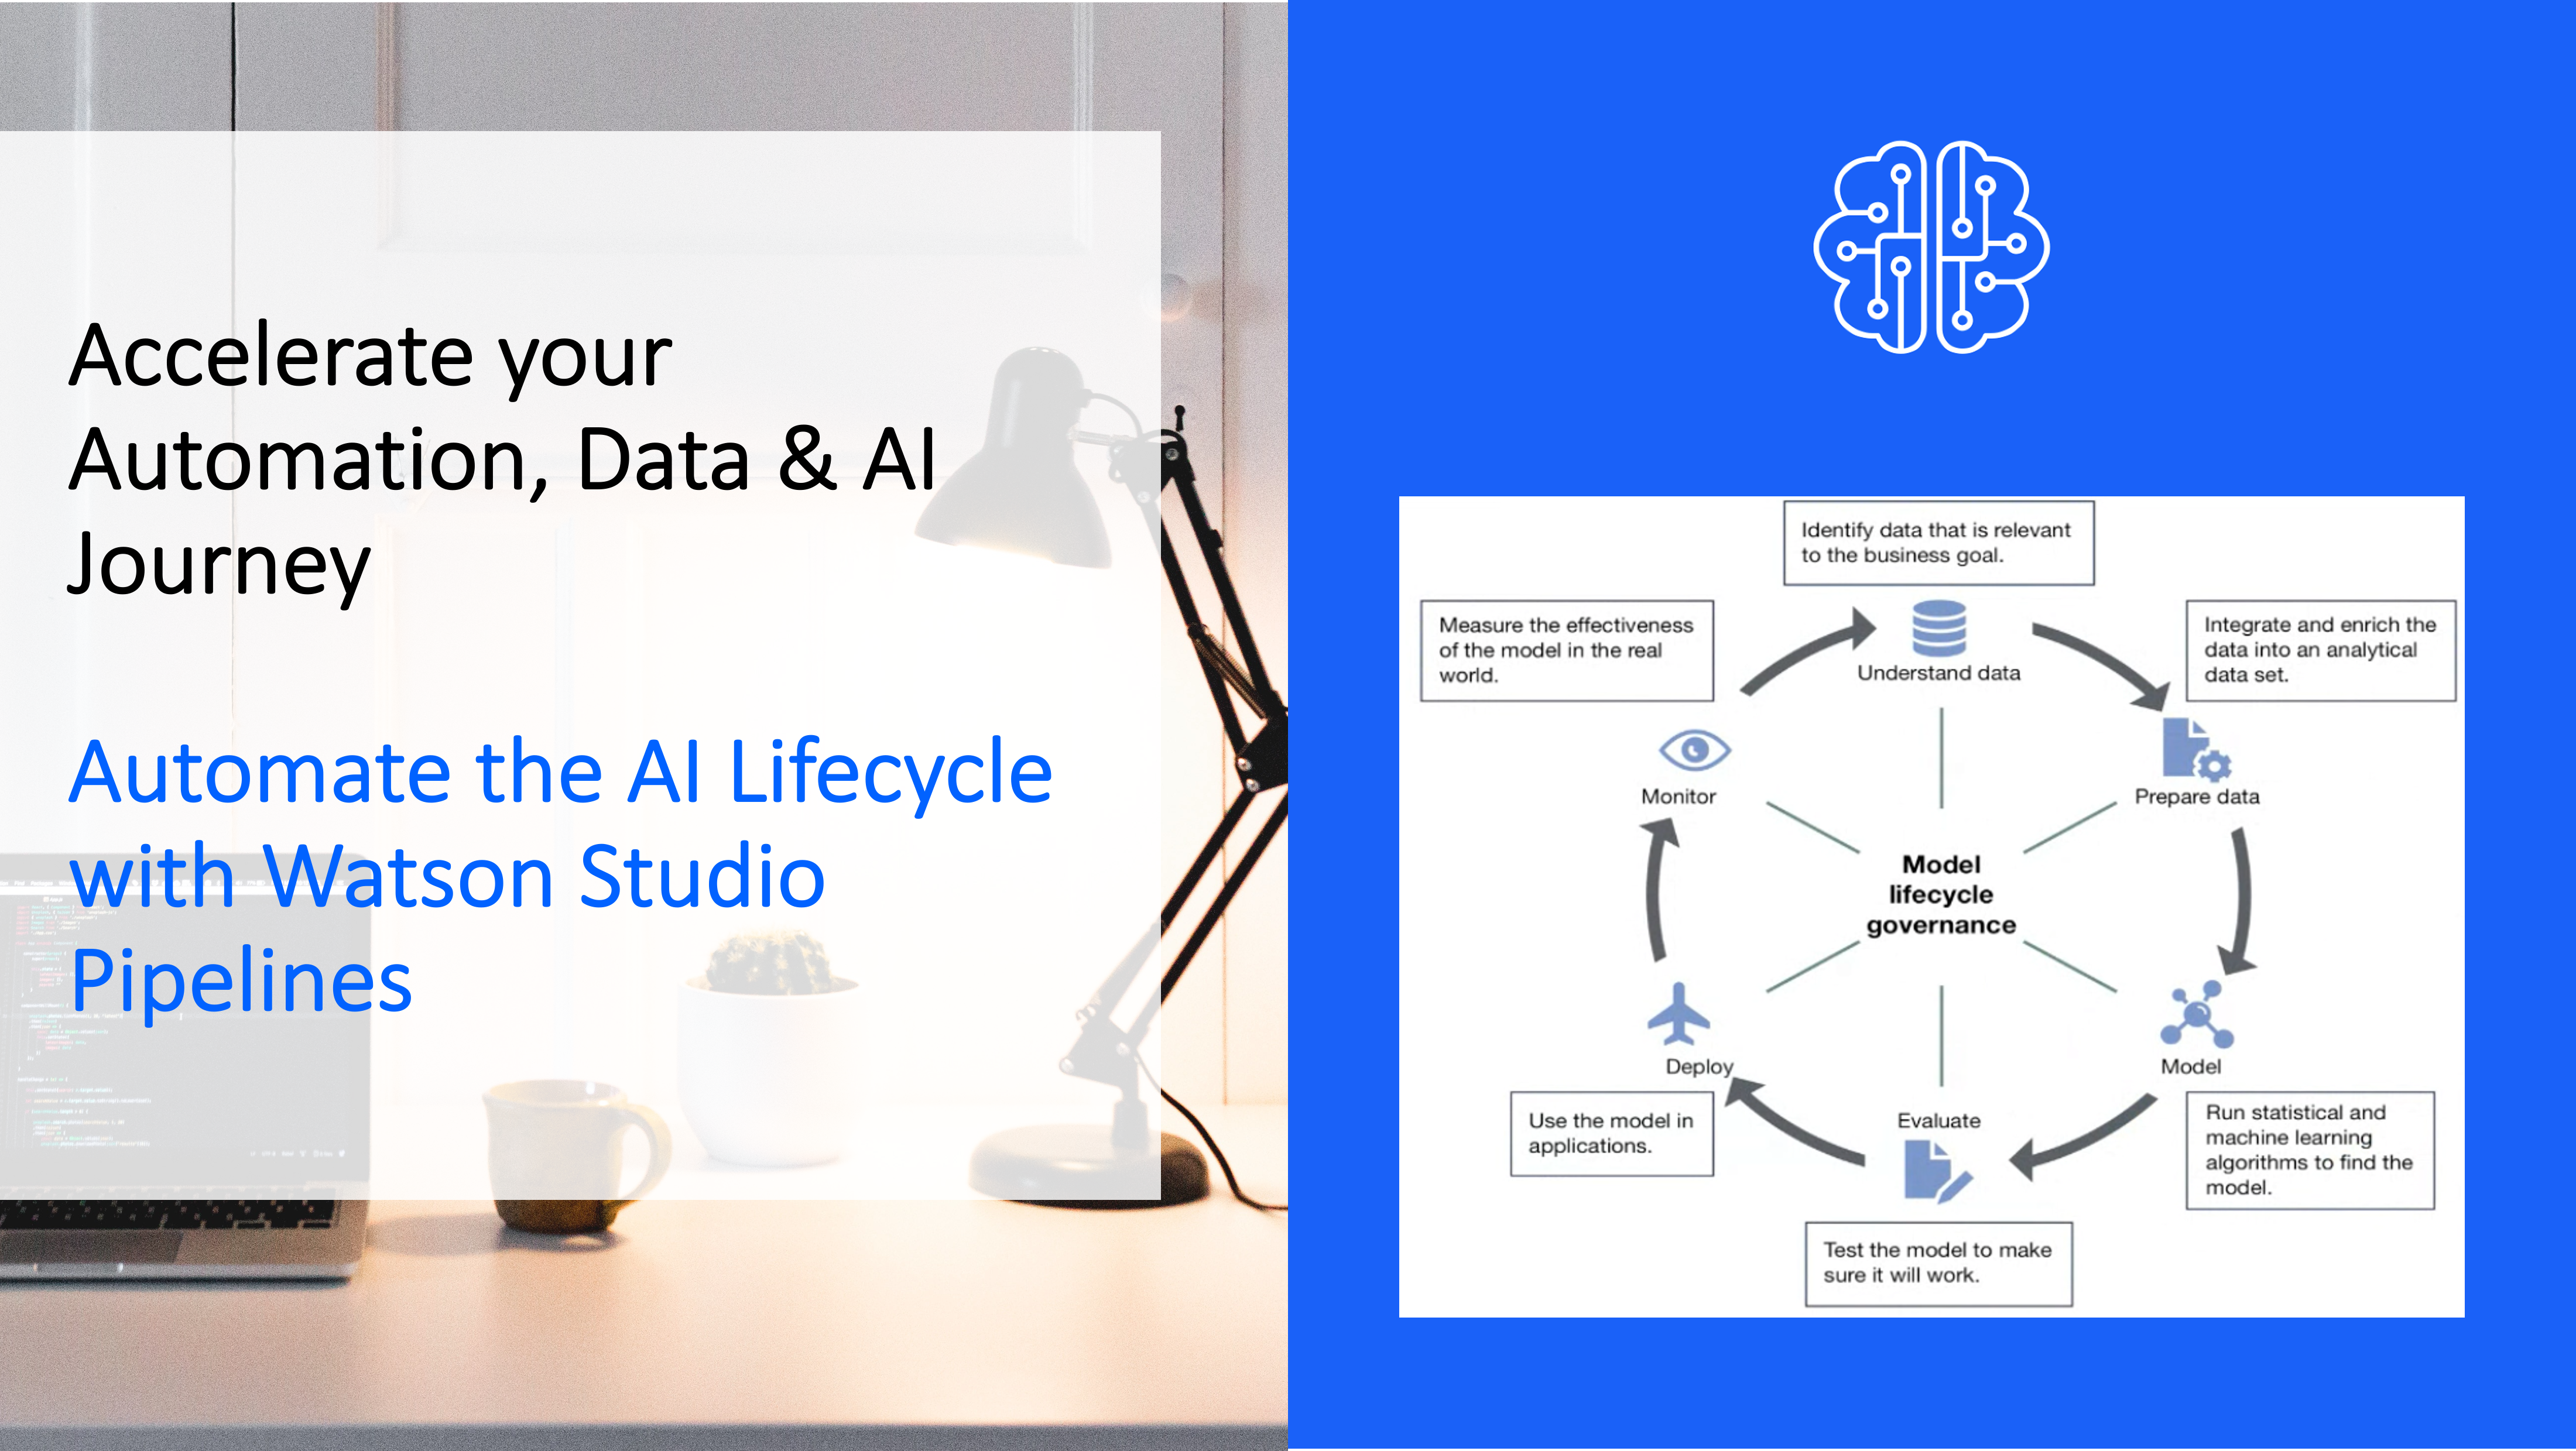 automate-the-ai-lifecycle-with-watson-studio-pipelines